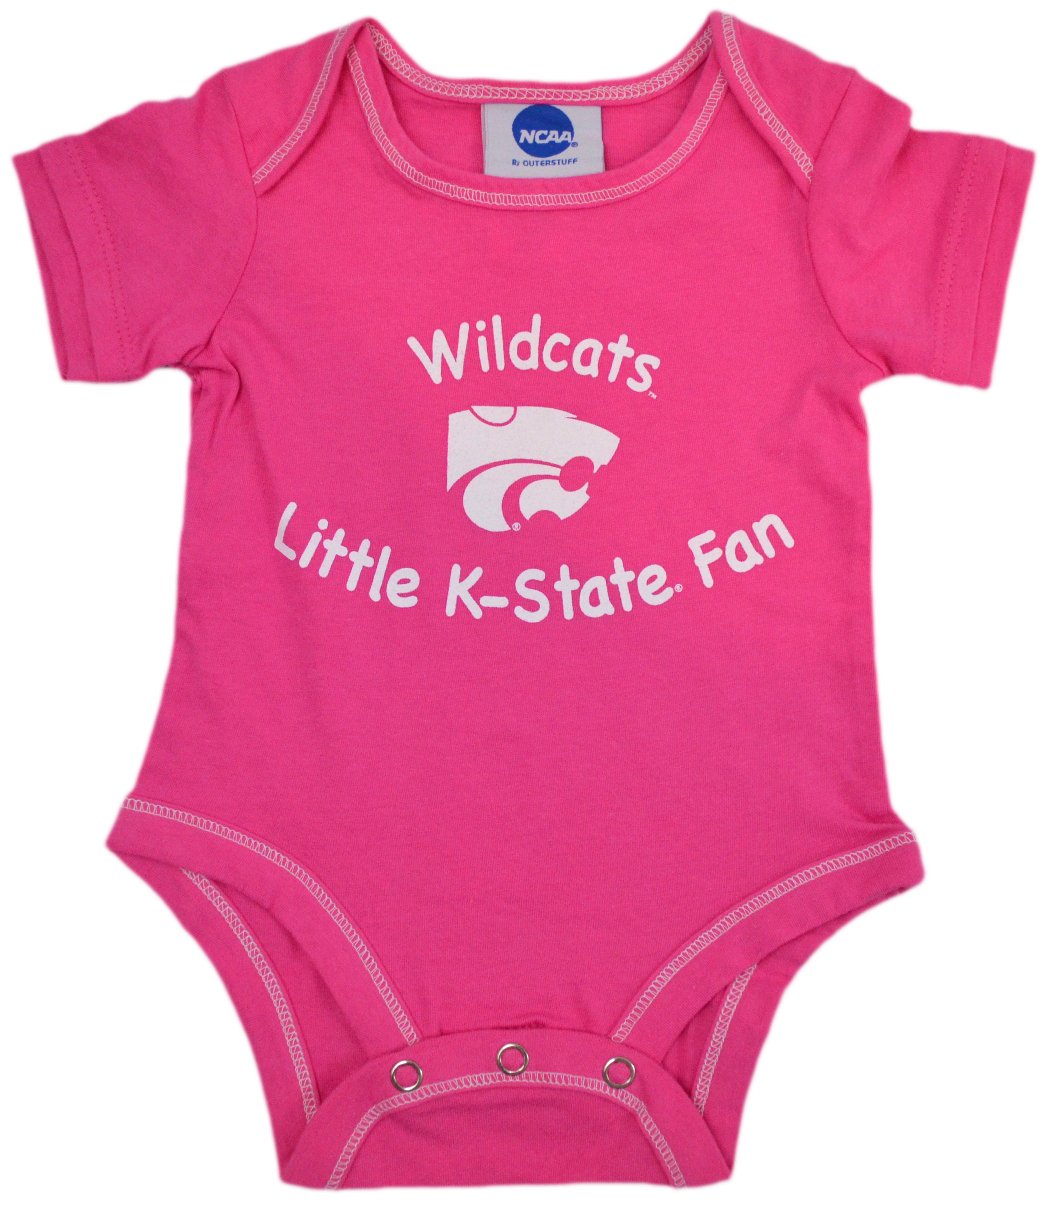 Official National Collegiate Athletic Association Fan Shop Authentic NCAA Baby Pink 2-pack Body Suit Onesies. Get the Little Ones Started Early Representing their Future College and Show School Pride